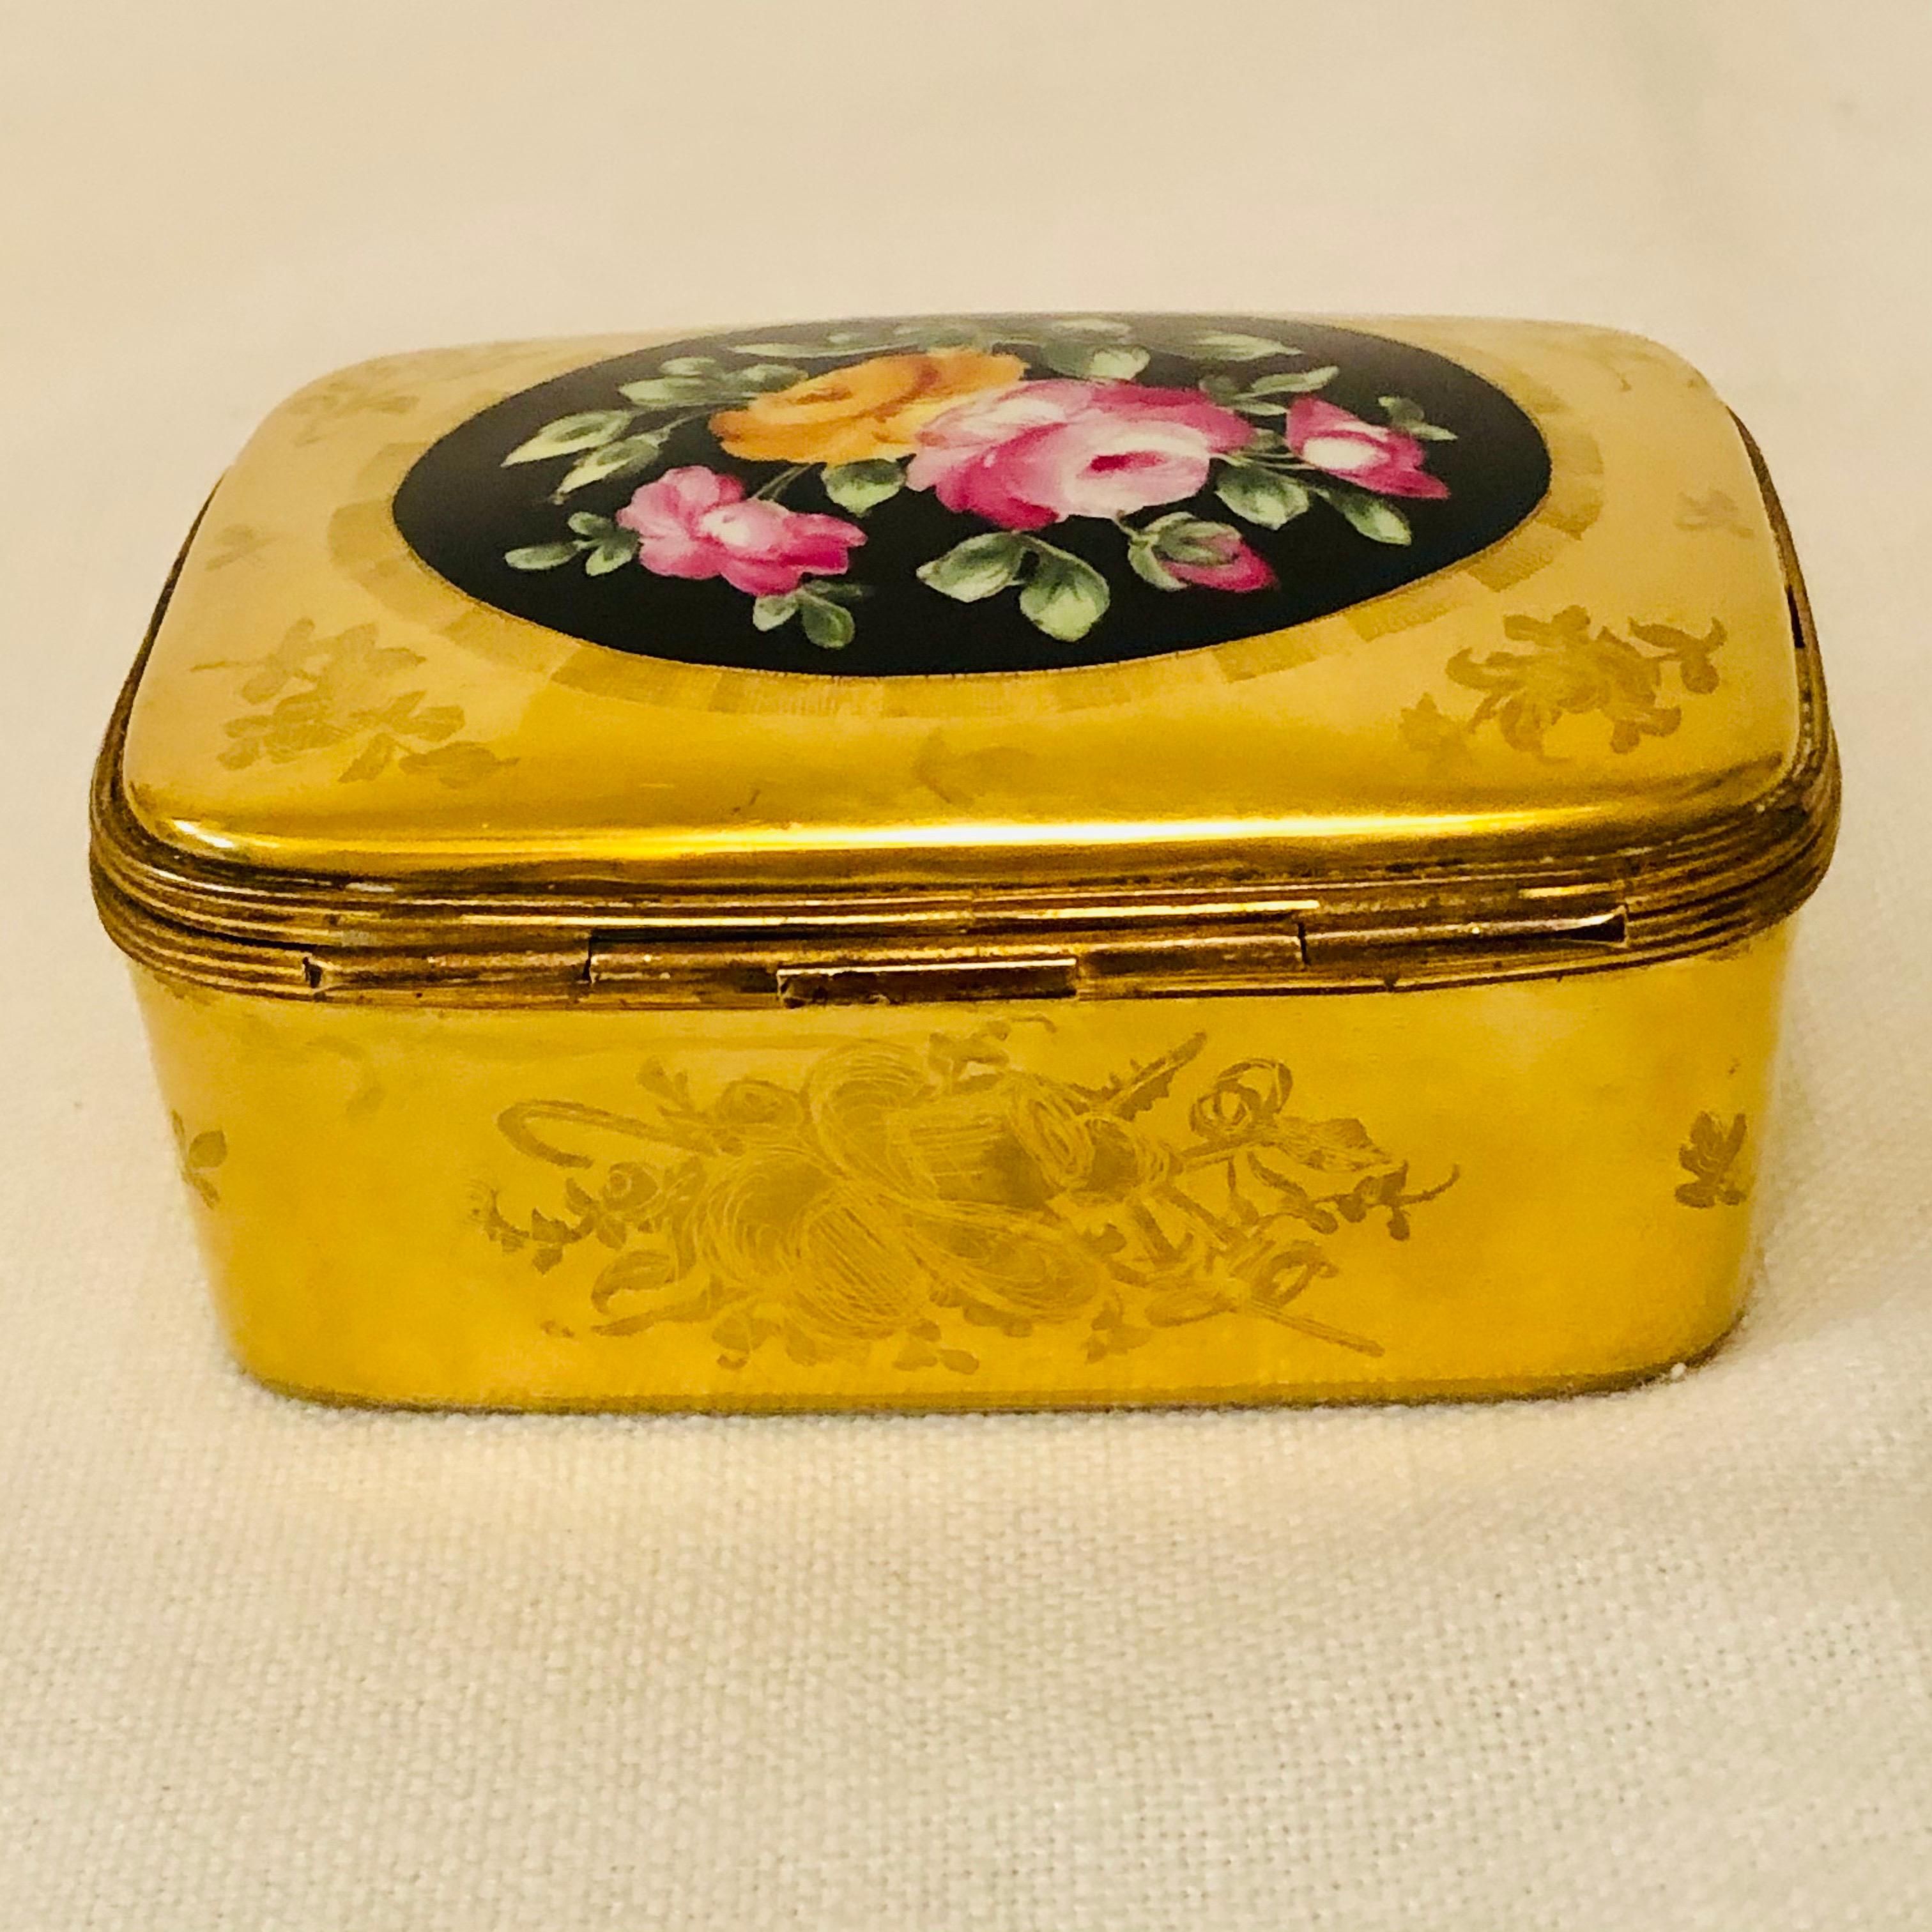 Gilt Le Tallec Box with a Gold BackGround and a Central Painting of a Flower Bouquet